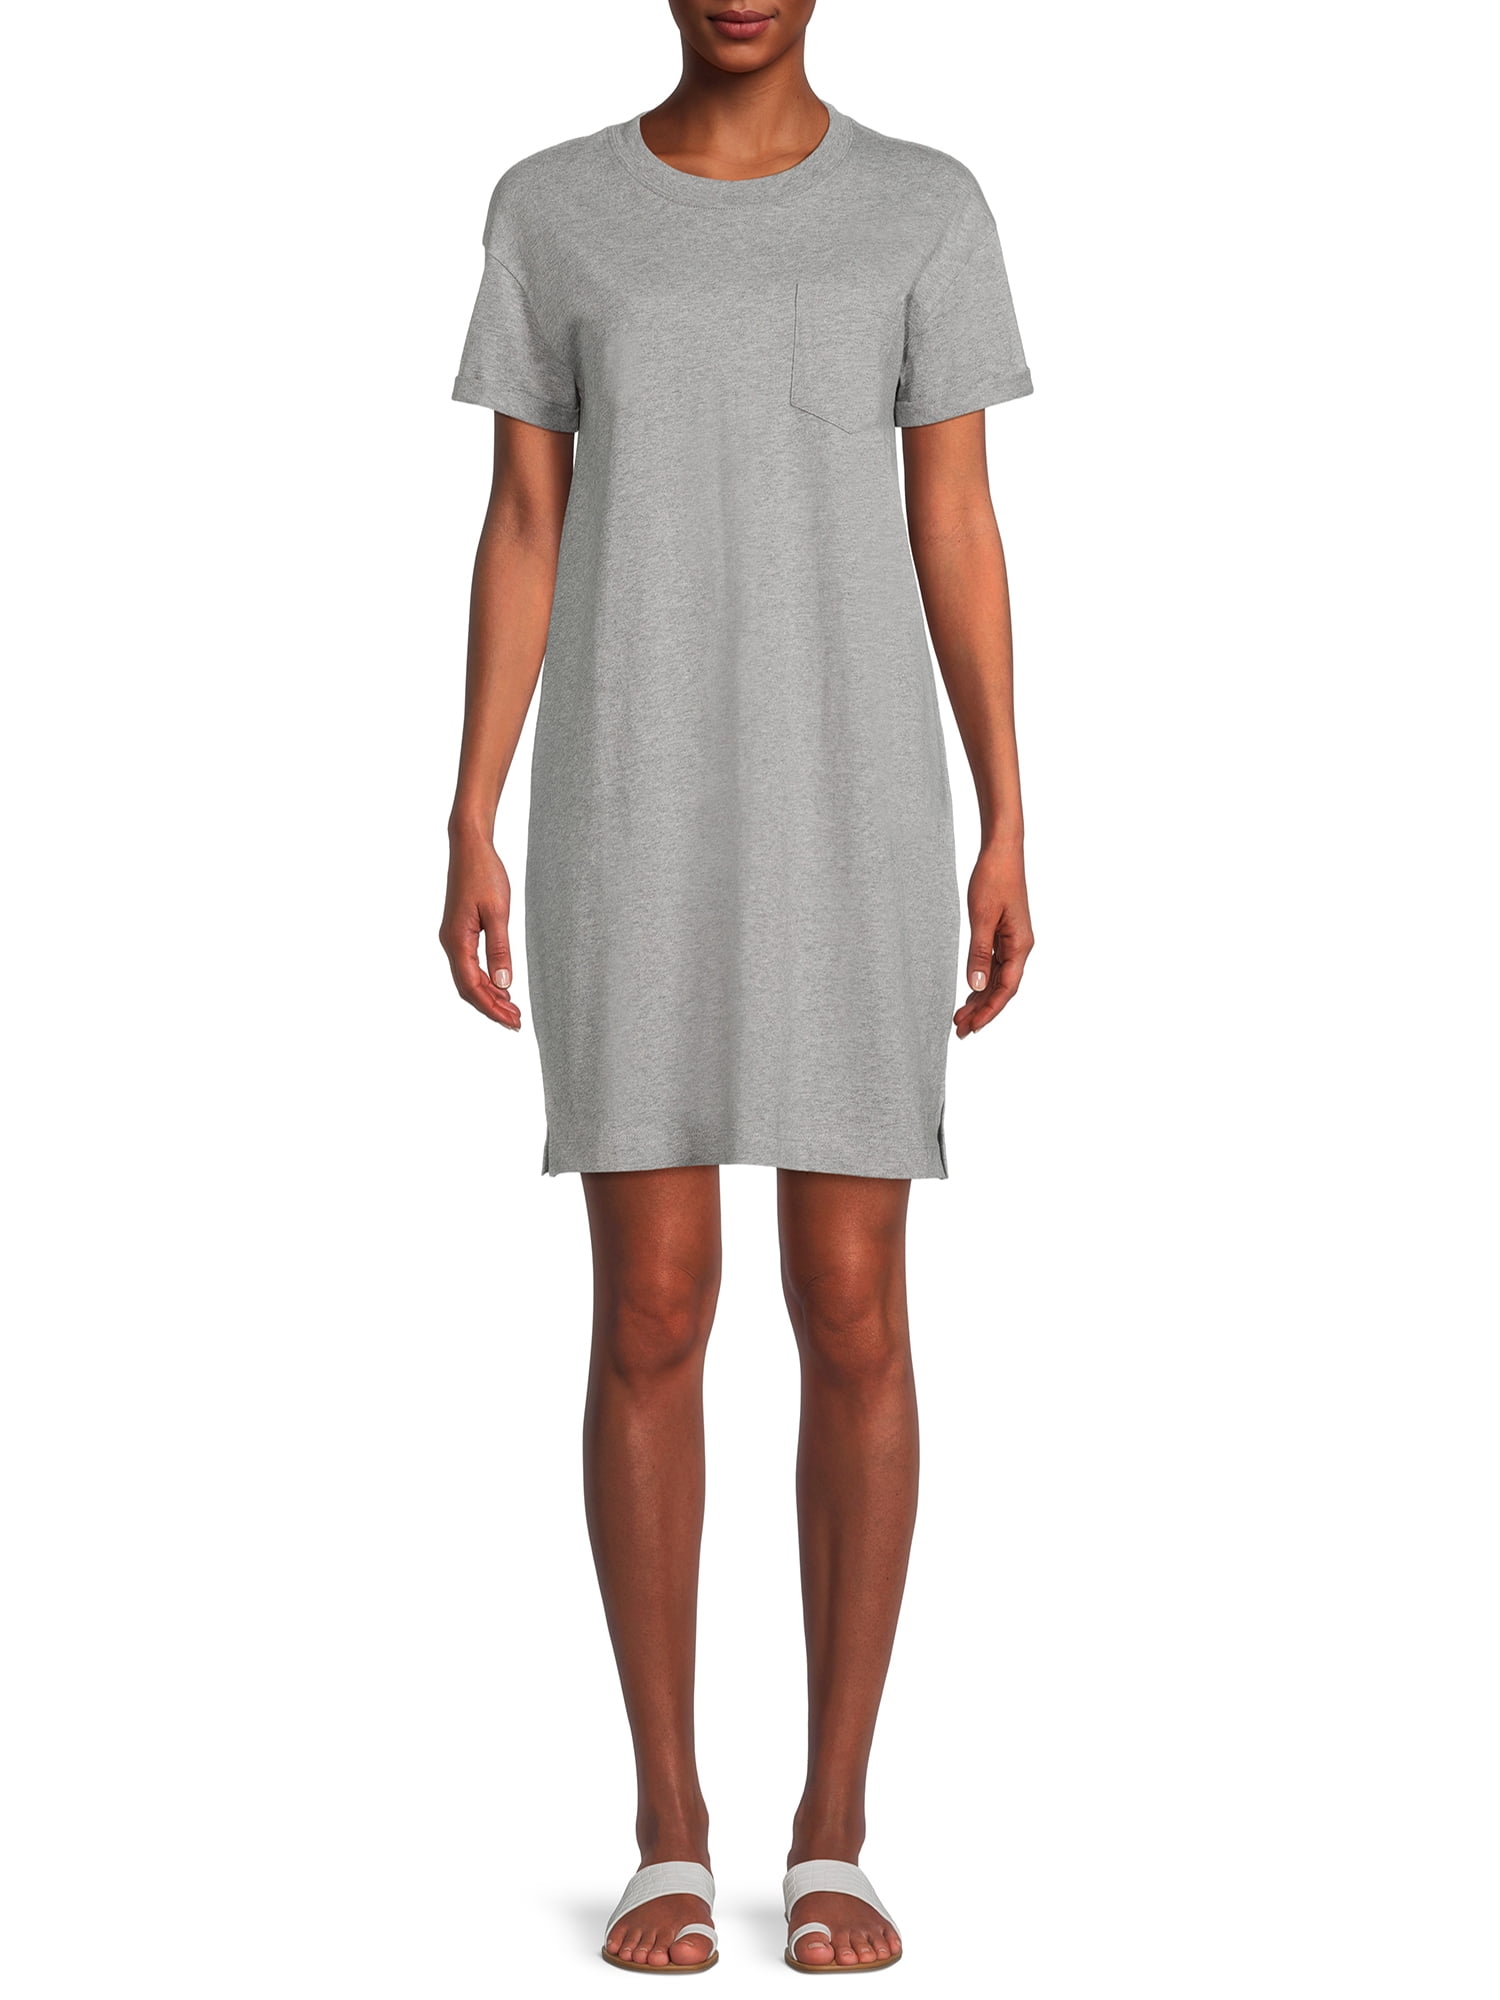 Time and Tru Women's T-Shirt Dress with Pocket